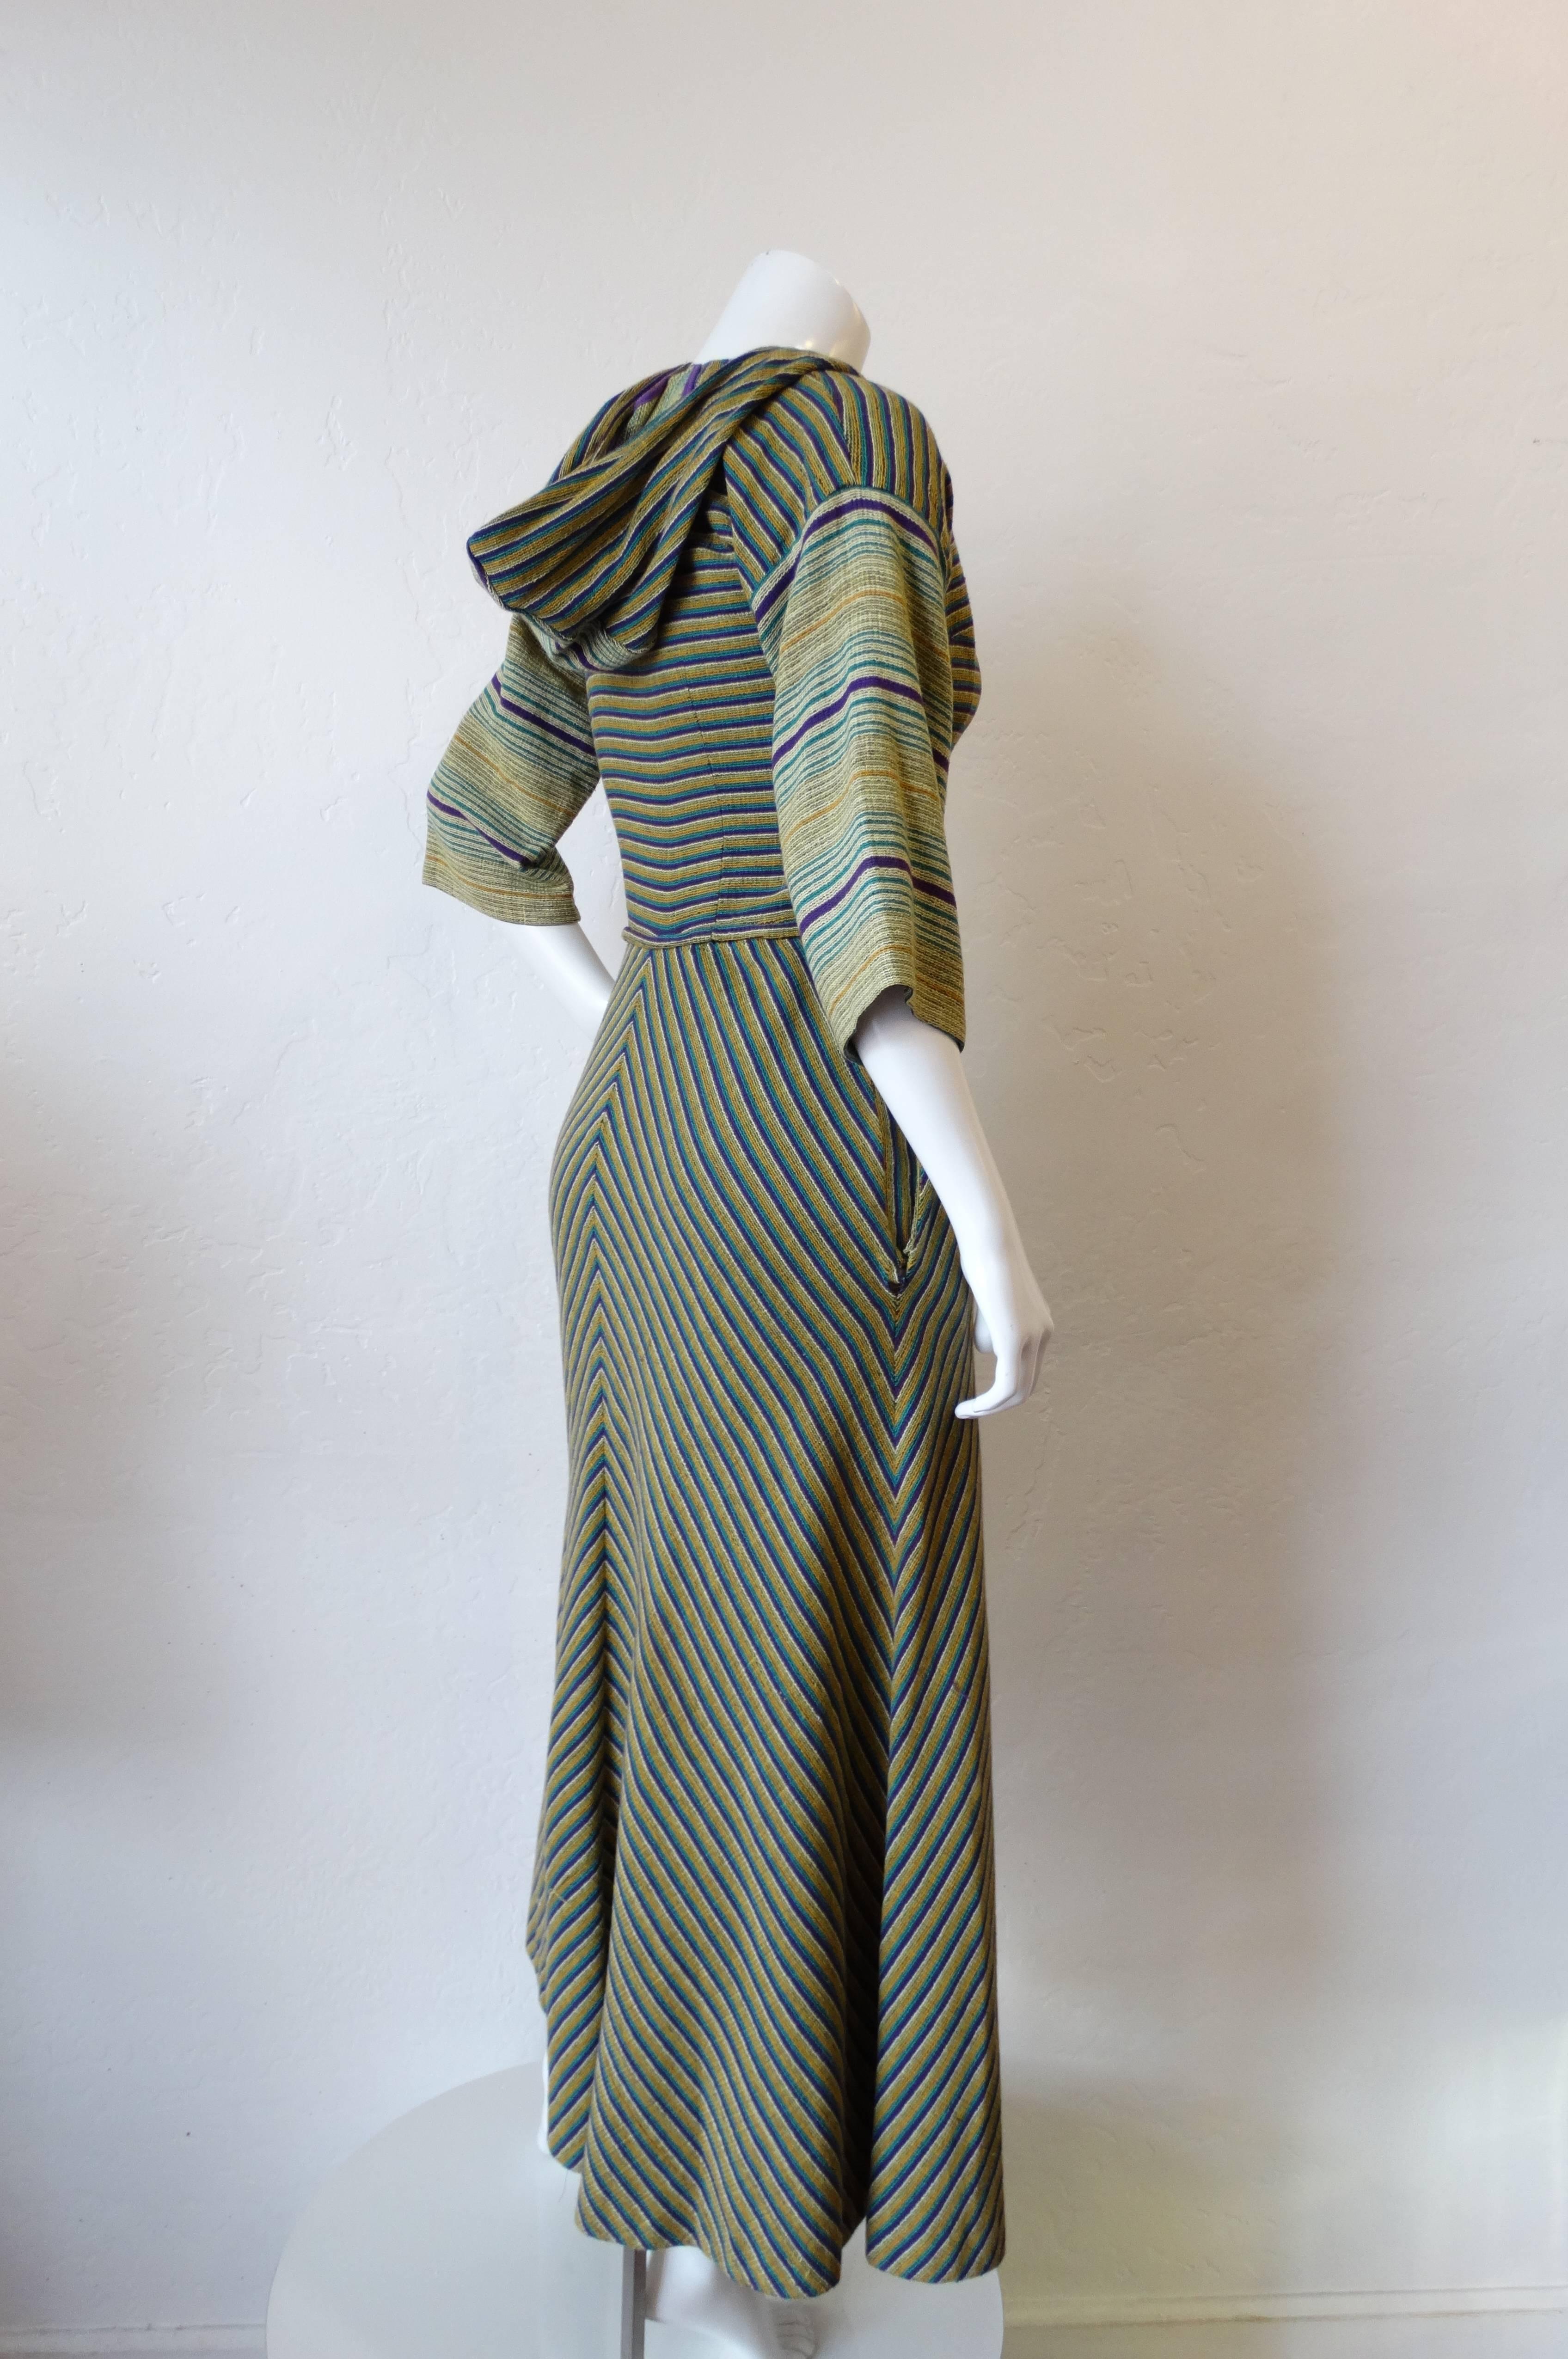 1970s hooded dress from the coveted Israeli designer Rikma! Sexy zip up closure up the front. Thick woven cotton in a purple, teal, and yellow striped print. Maxi length silhouette with unique hood detail and pockets at the hips! Best fits a size